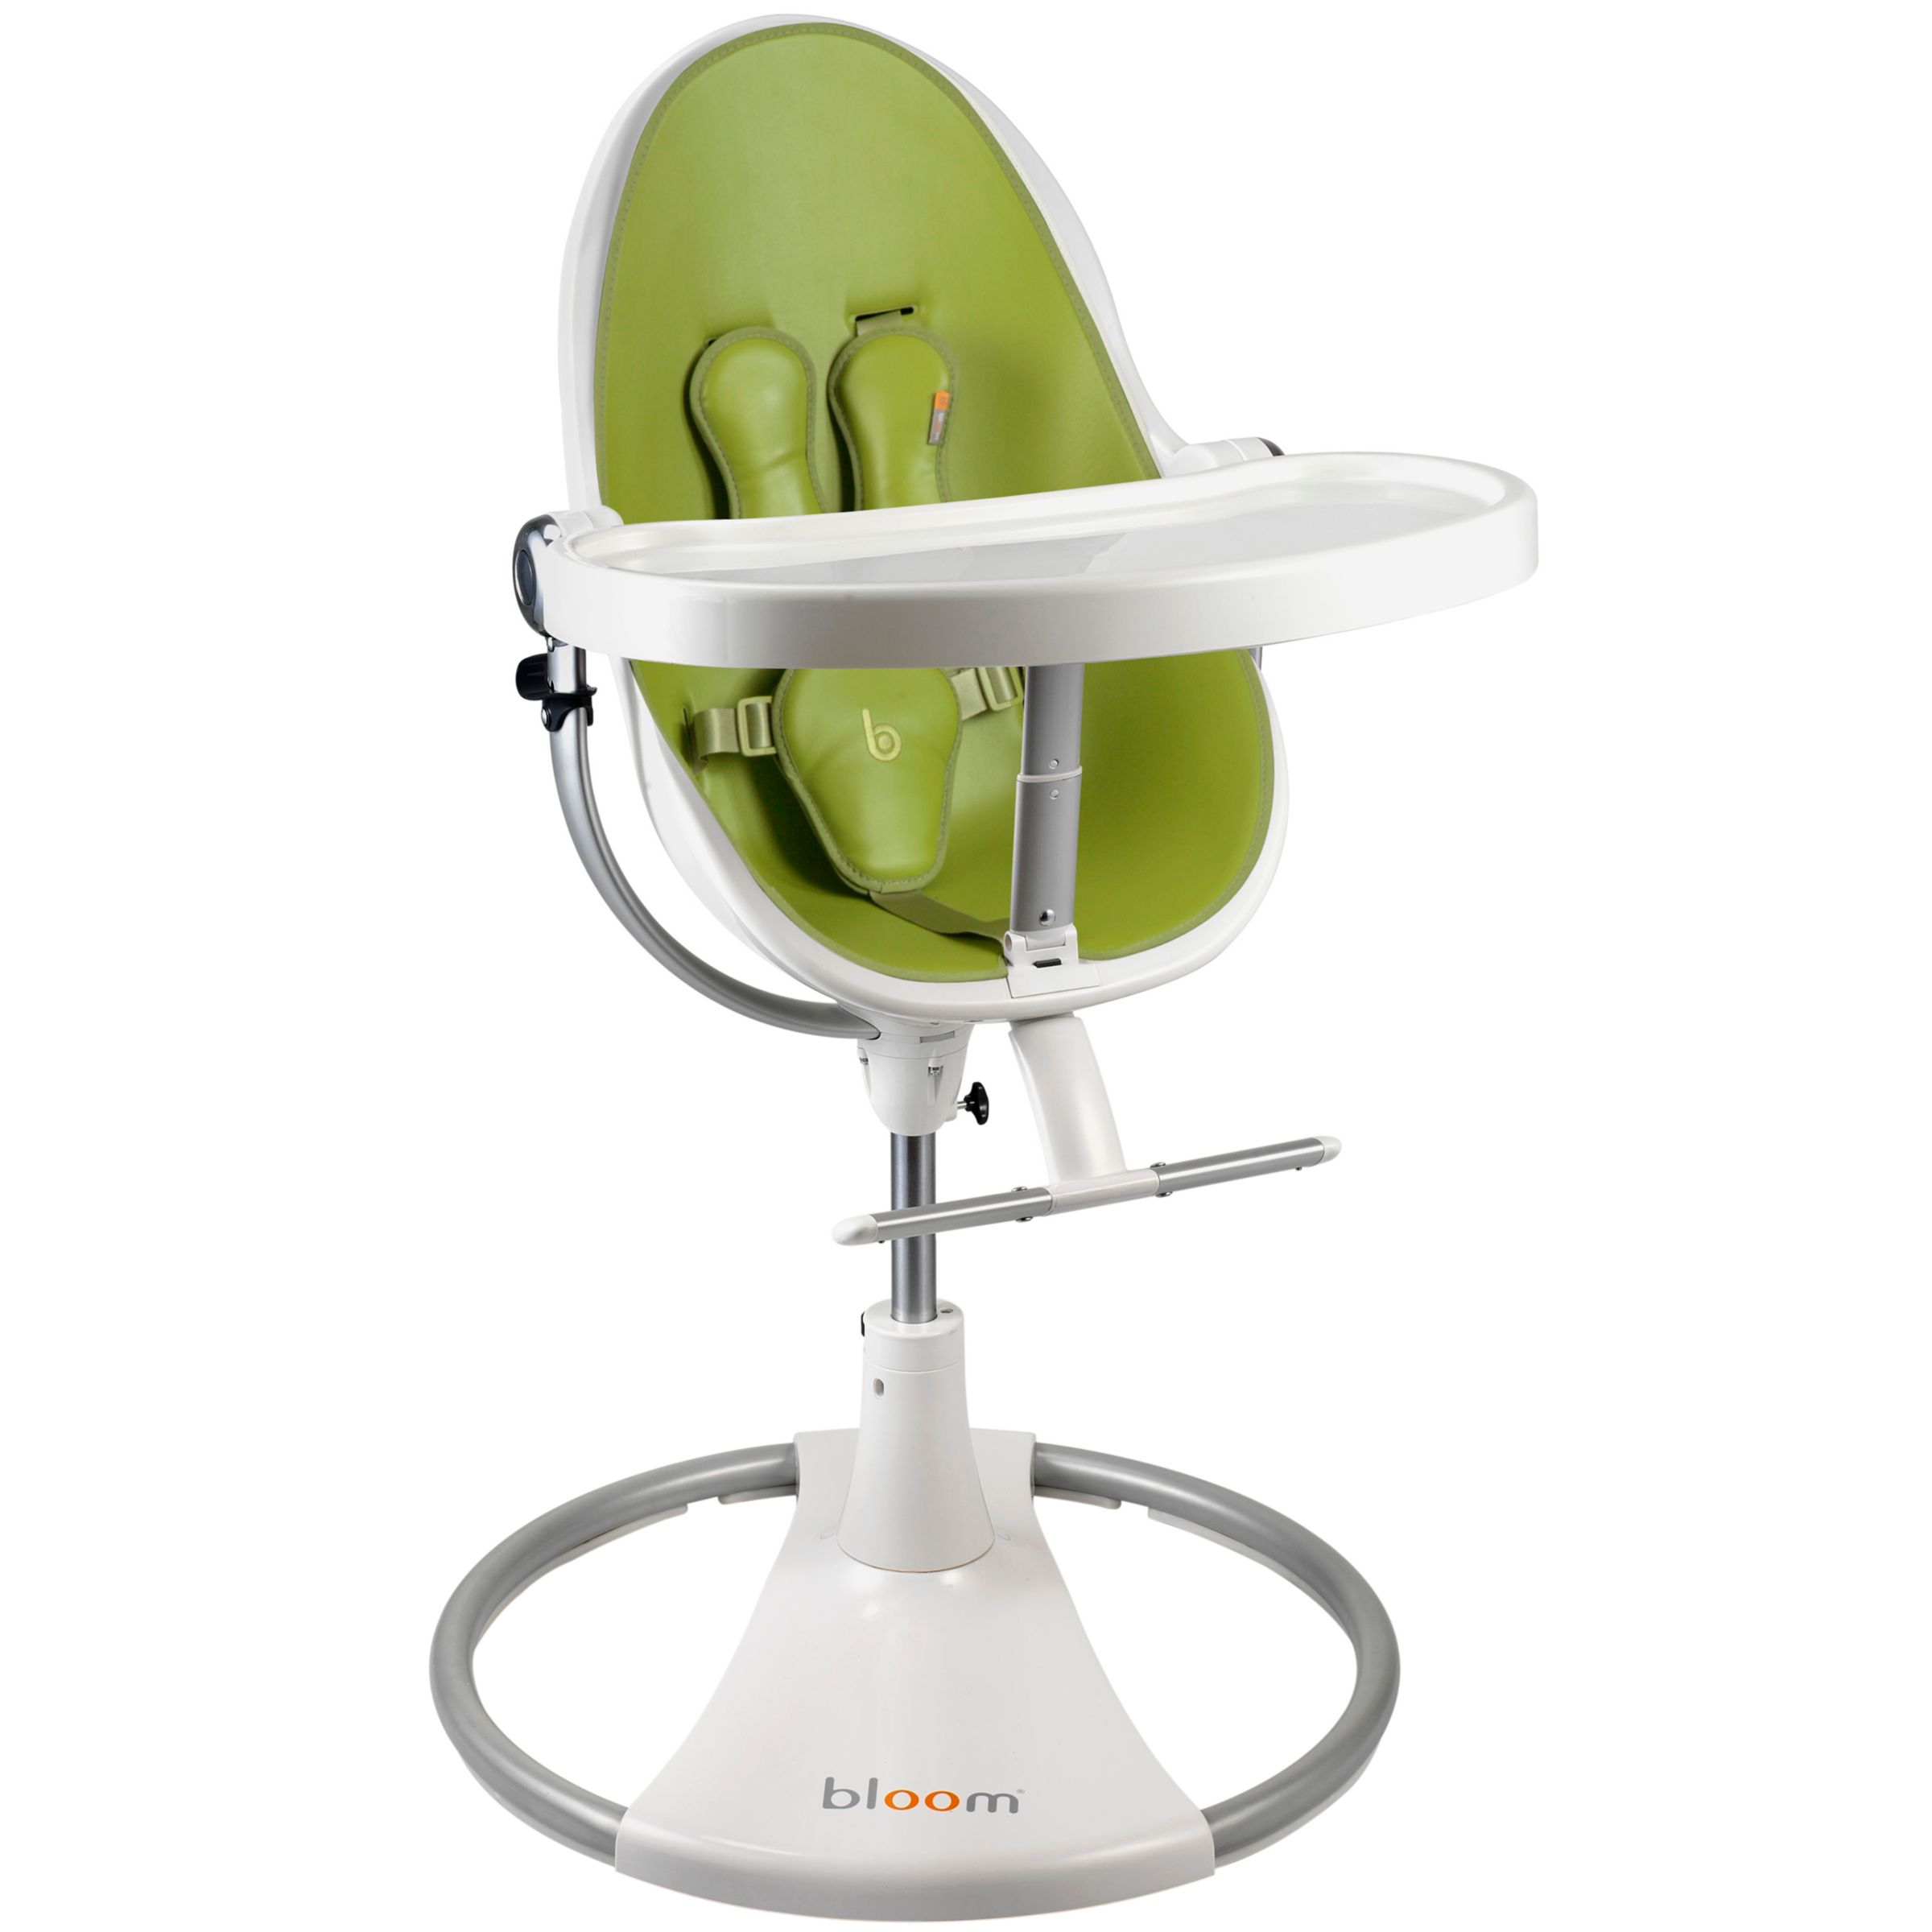 bloom Fresco Classic Contemporary Leatherette Baby Chair, Gala Green at JohnLewis